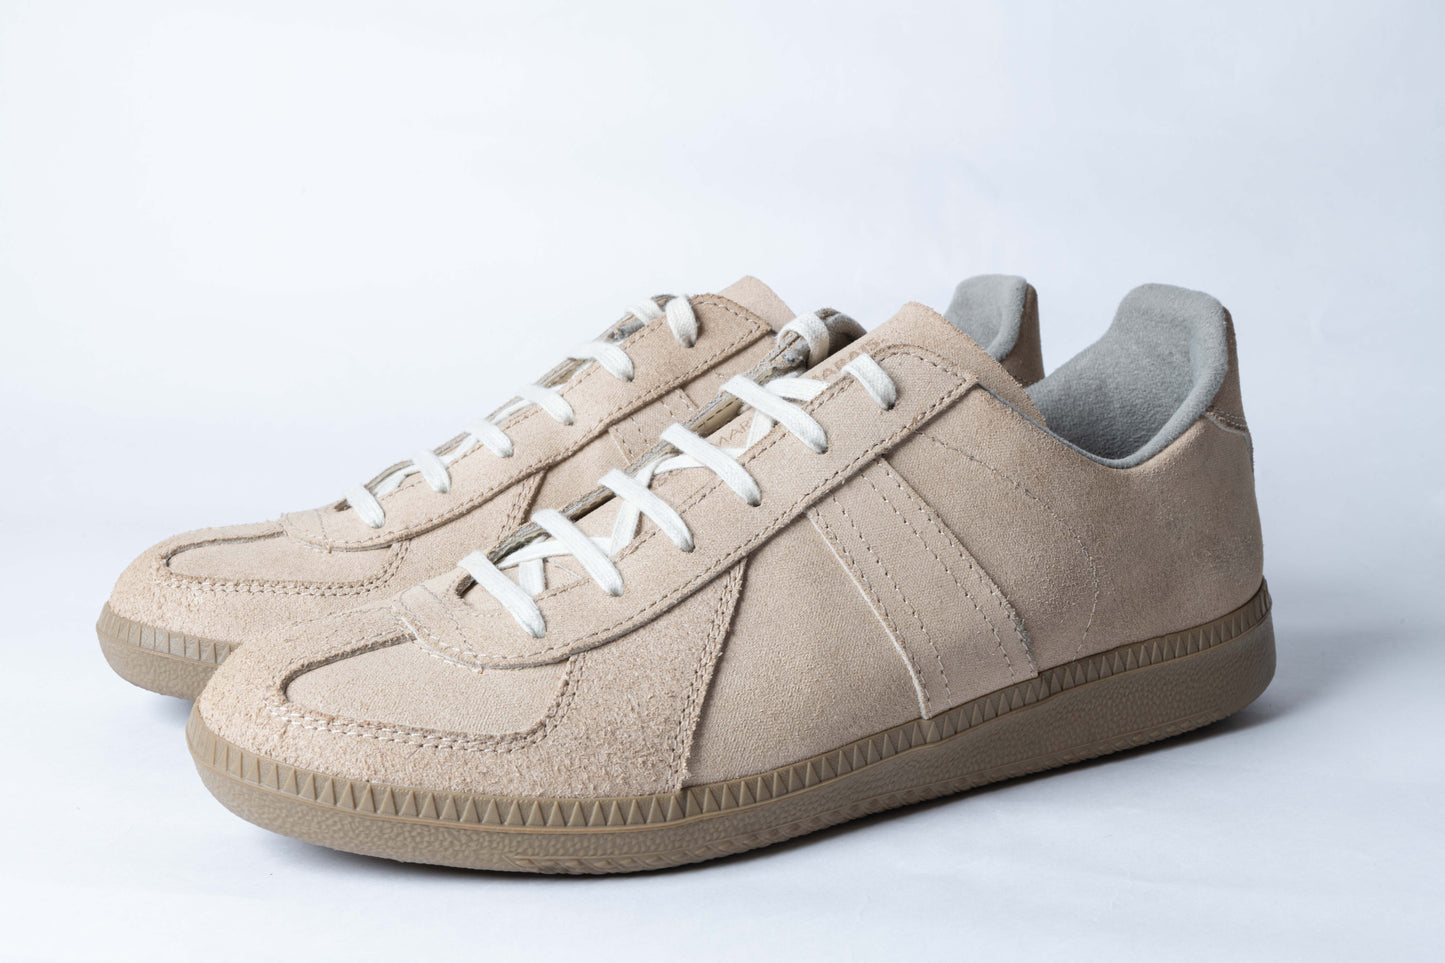 GERMAN TRAINER ORIGINAL MODEL MEETS SUSTAINABLE BY PMD